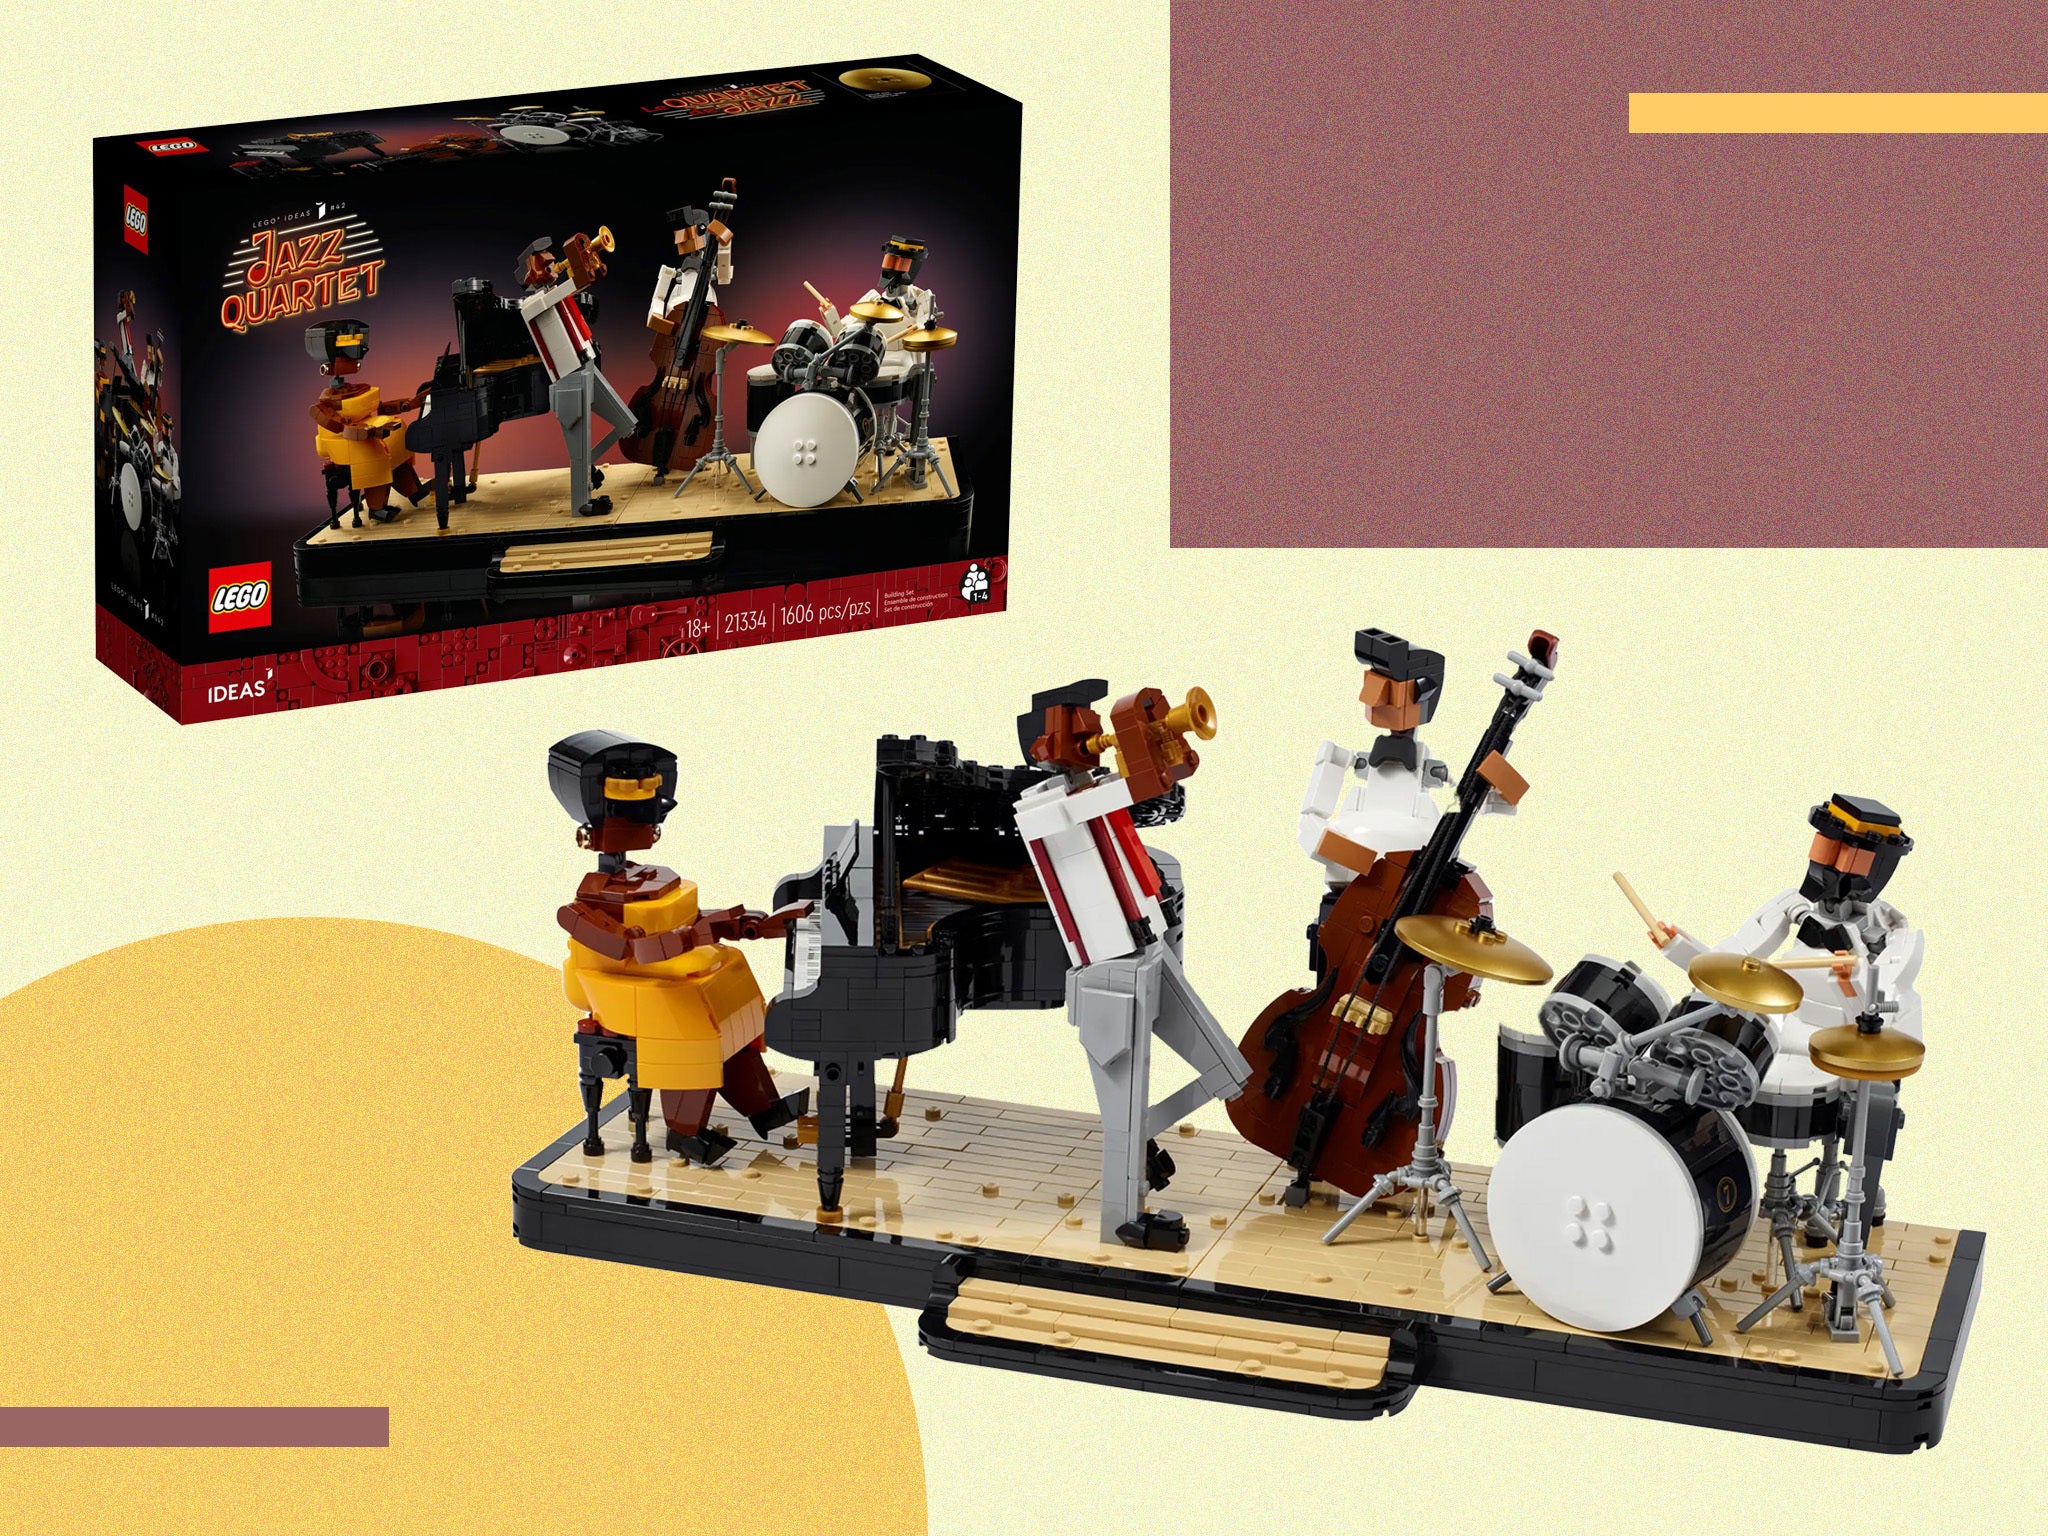 The 1,606-piece set features the whole band